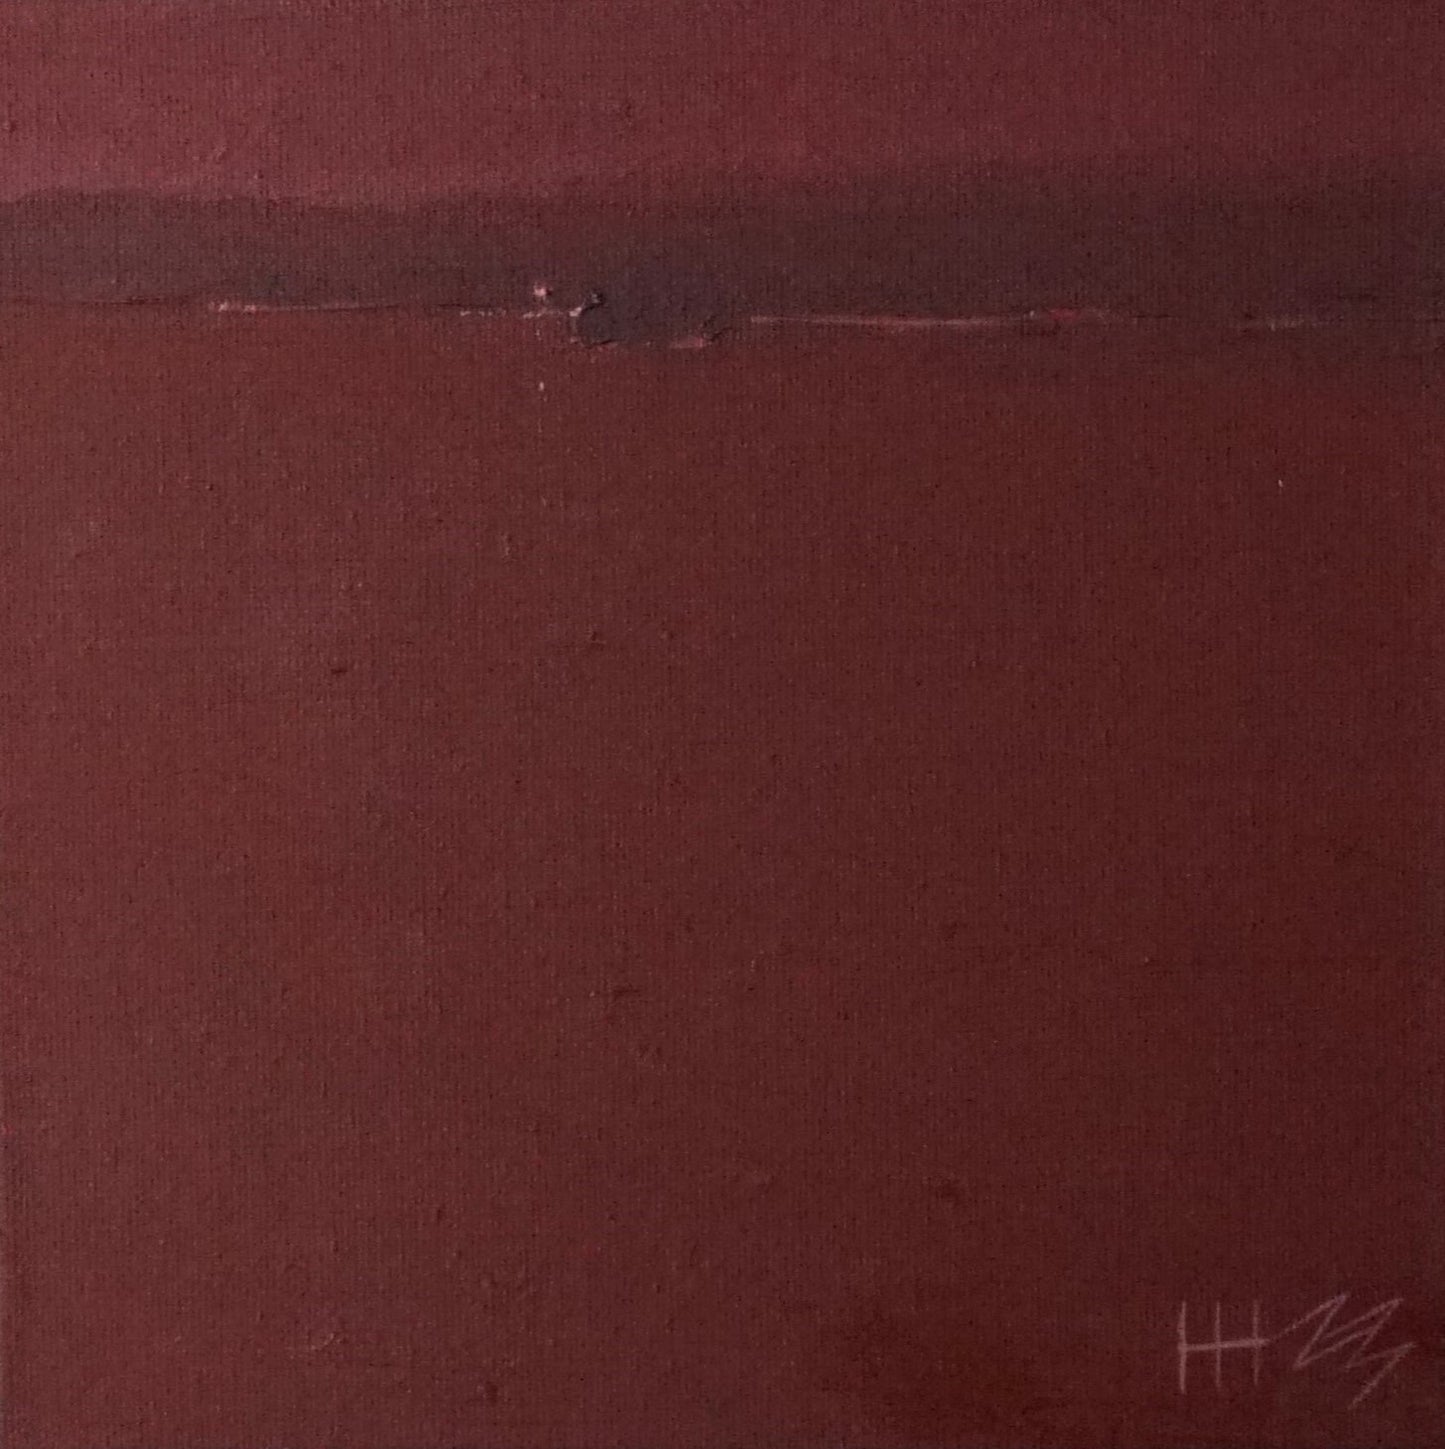 Lonely red- 18x18cm / Oil painting on canvas panel